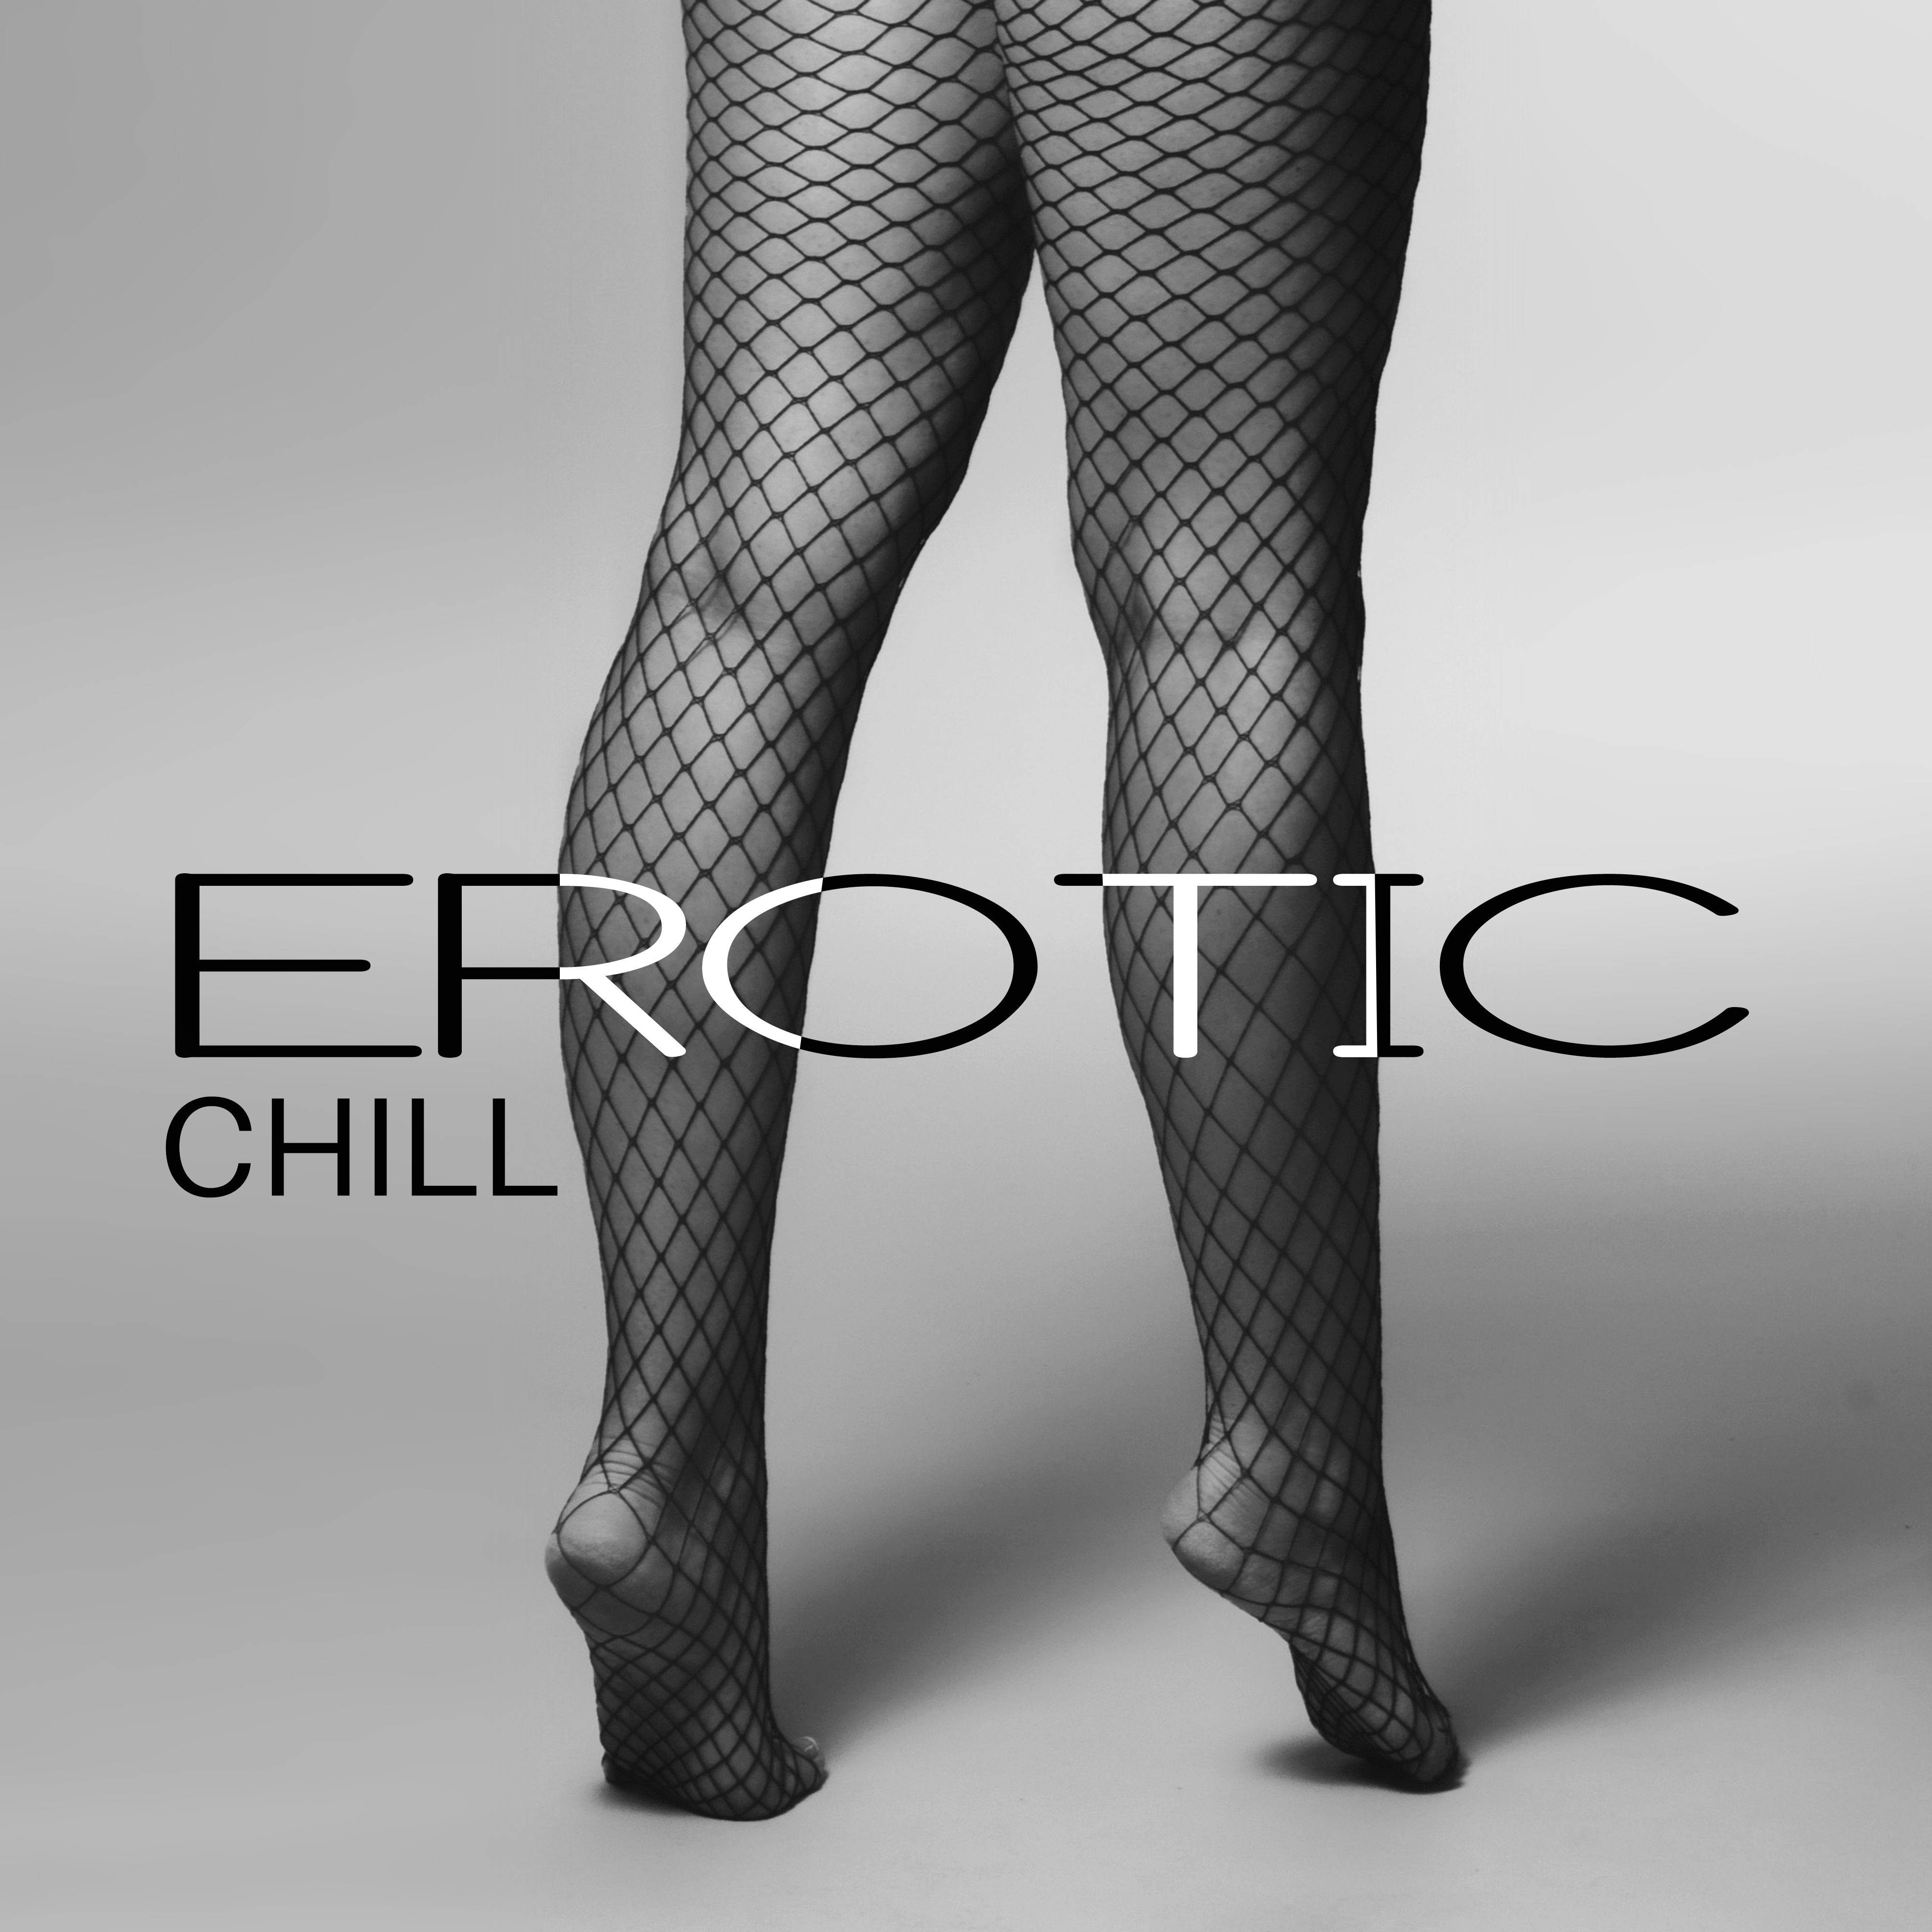 Erotic Chill – Music for Lovers, Sensual Dance, Made to Love, Chill Out Music, Deep Massage, Making Love